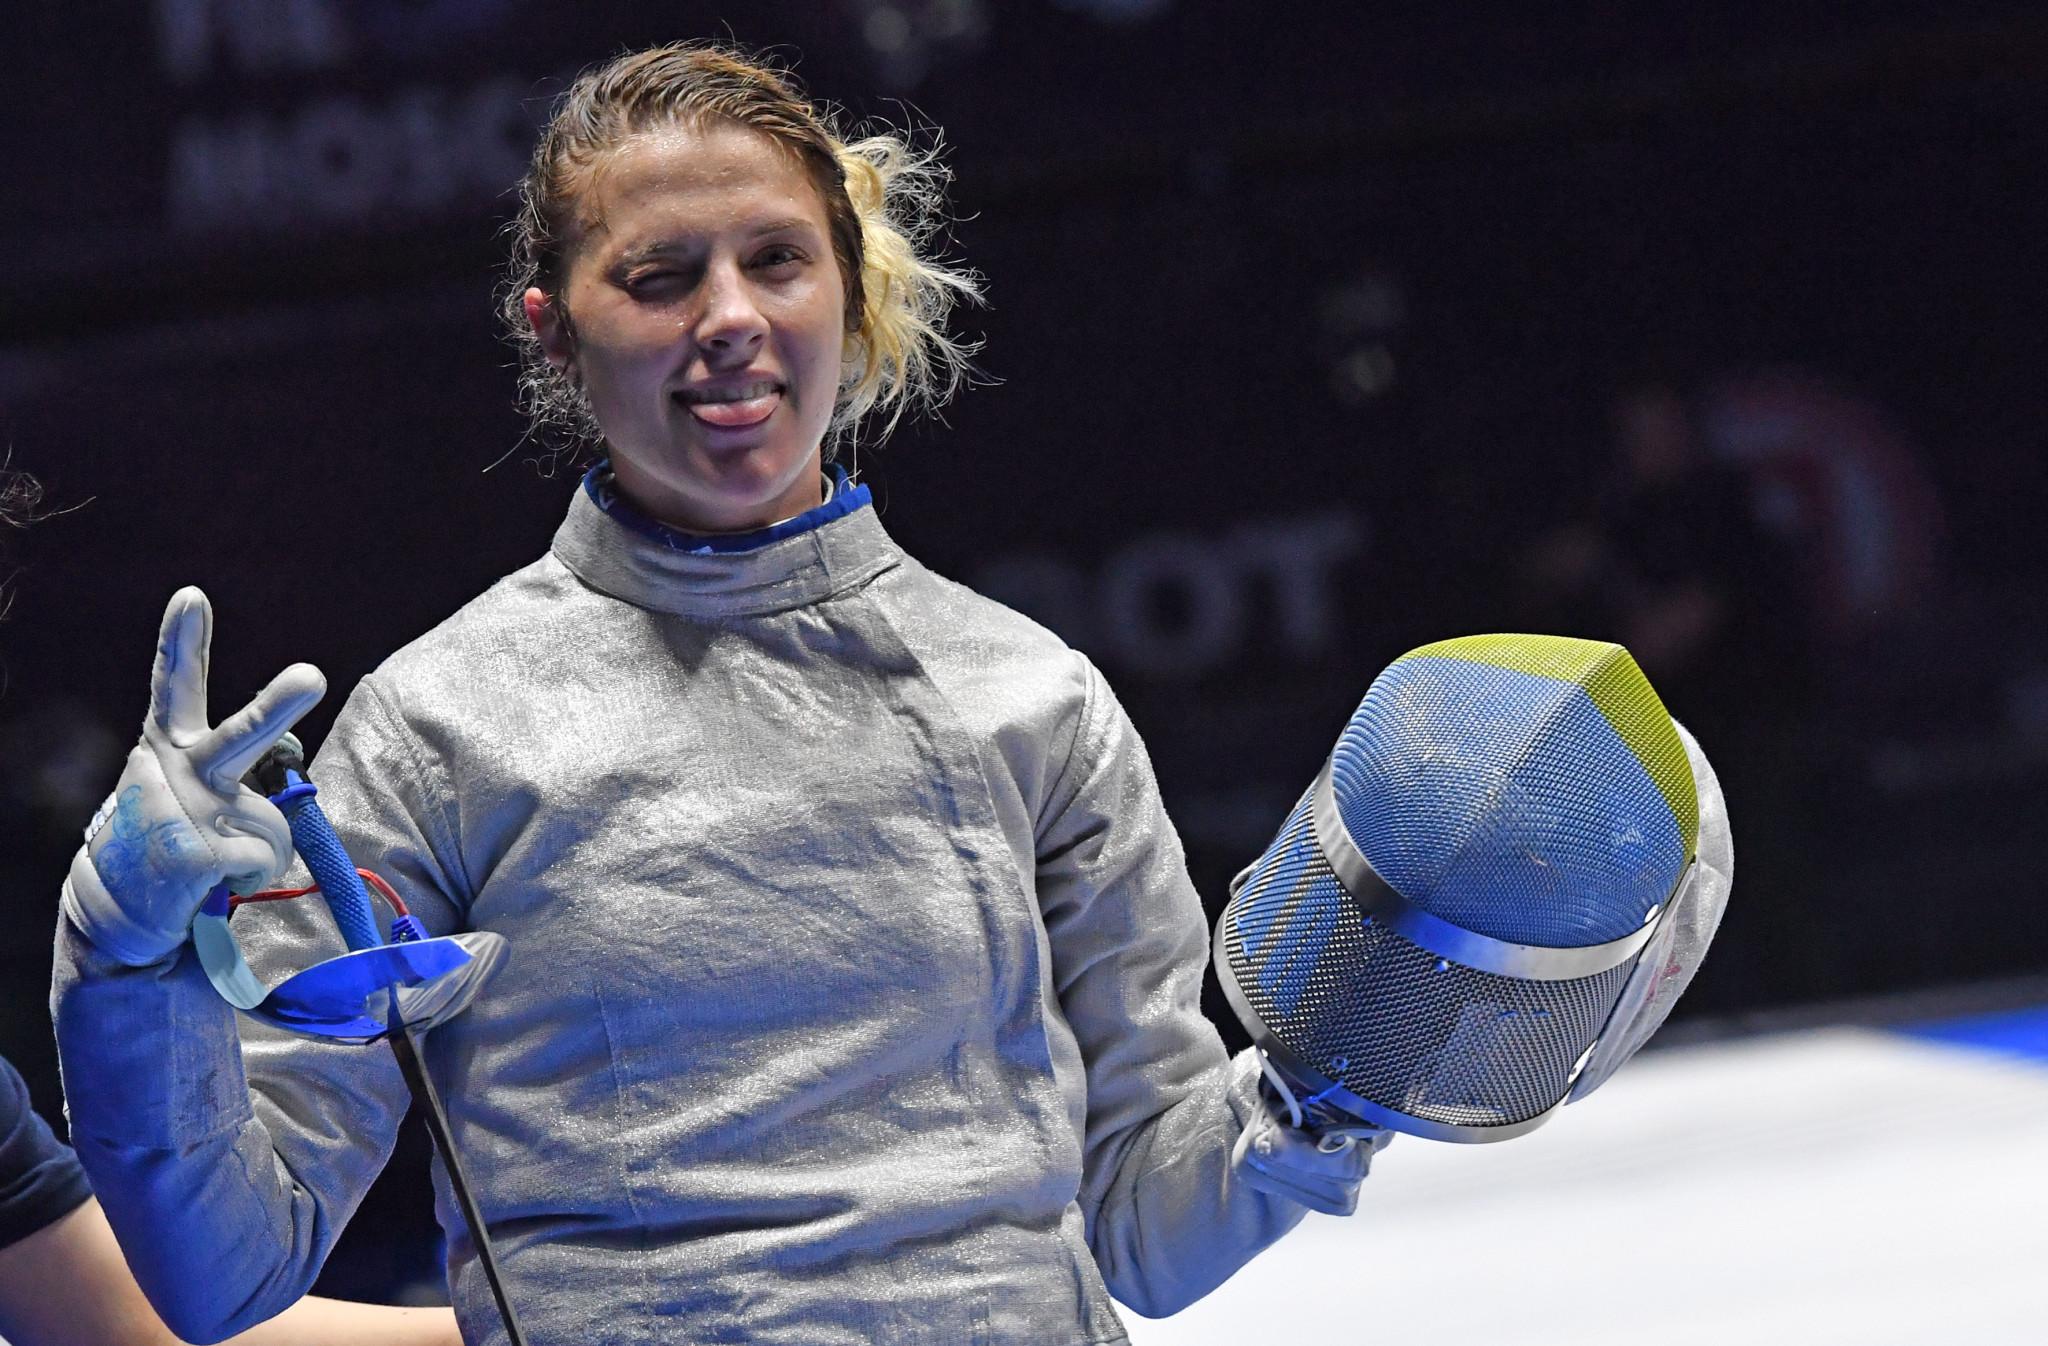 Olha Kharlan is the reigning women's sabre world champion ©Getty Images